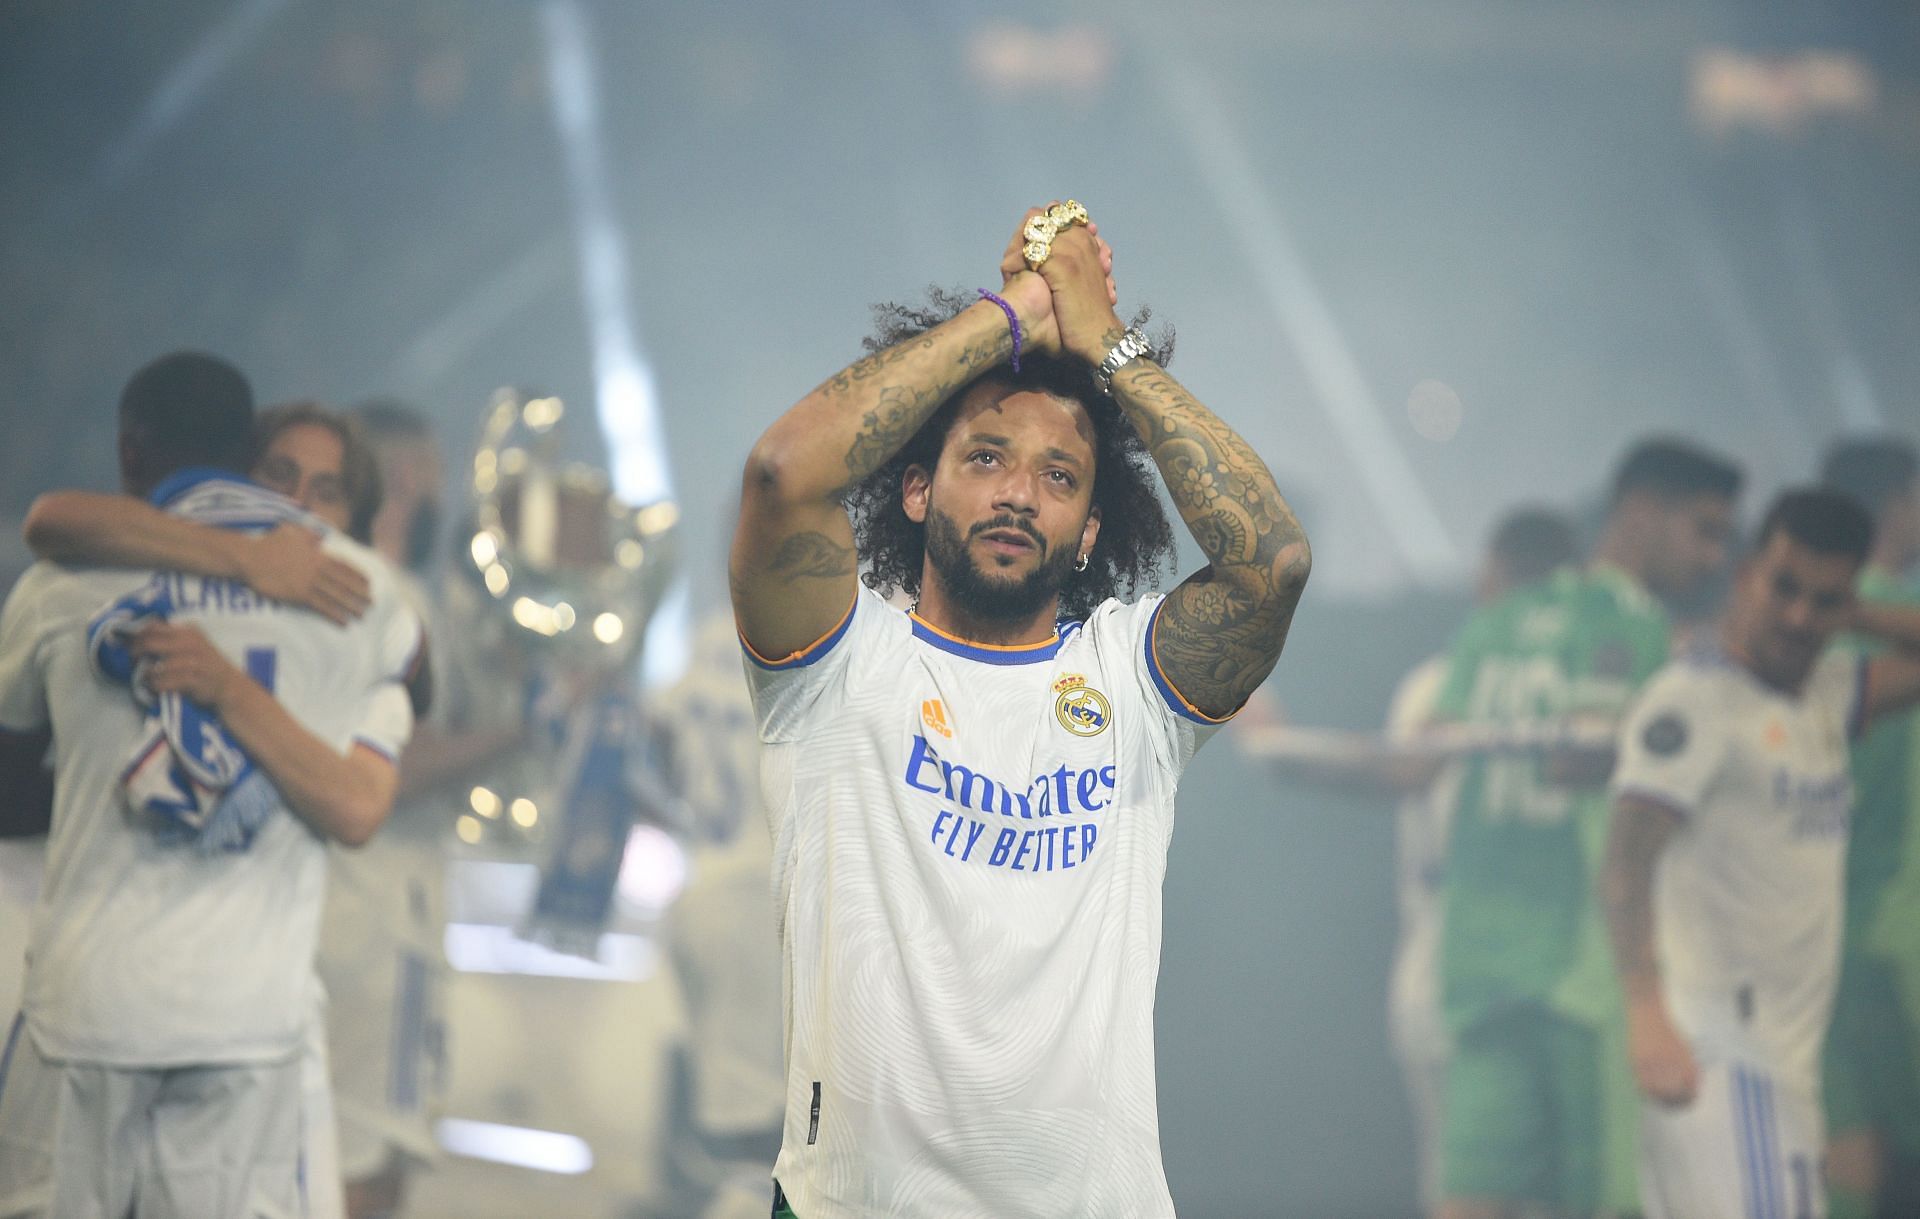 Marcelo is all set to leave the Santiago Bernabeu this summer.